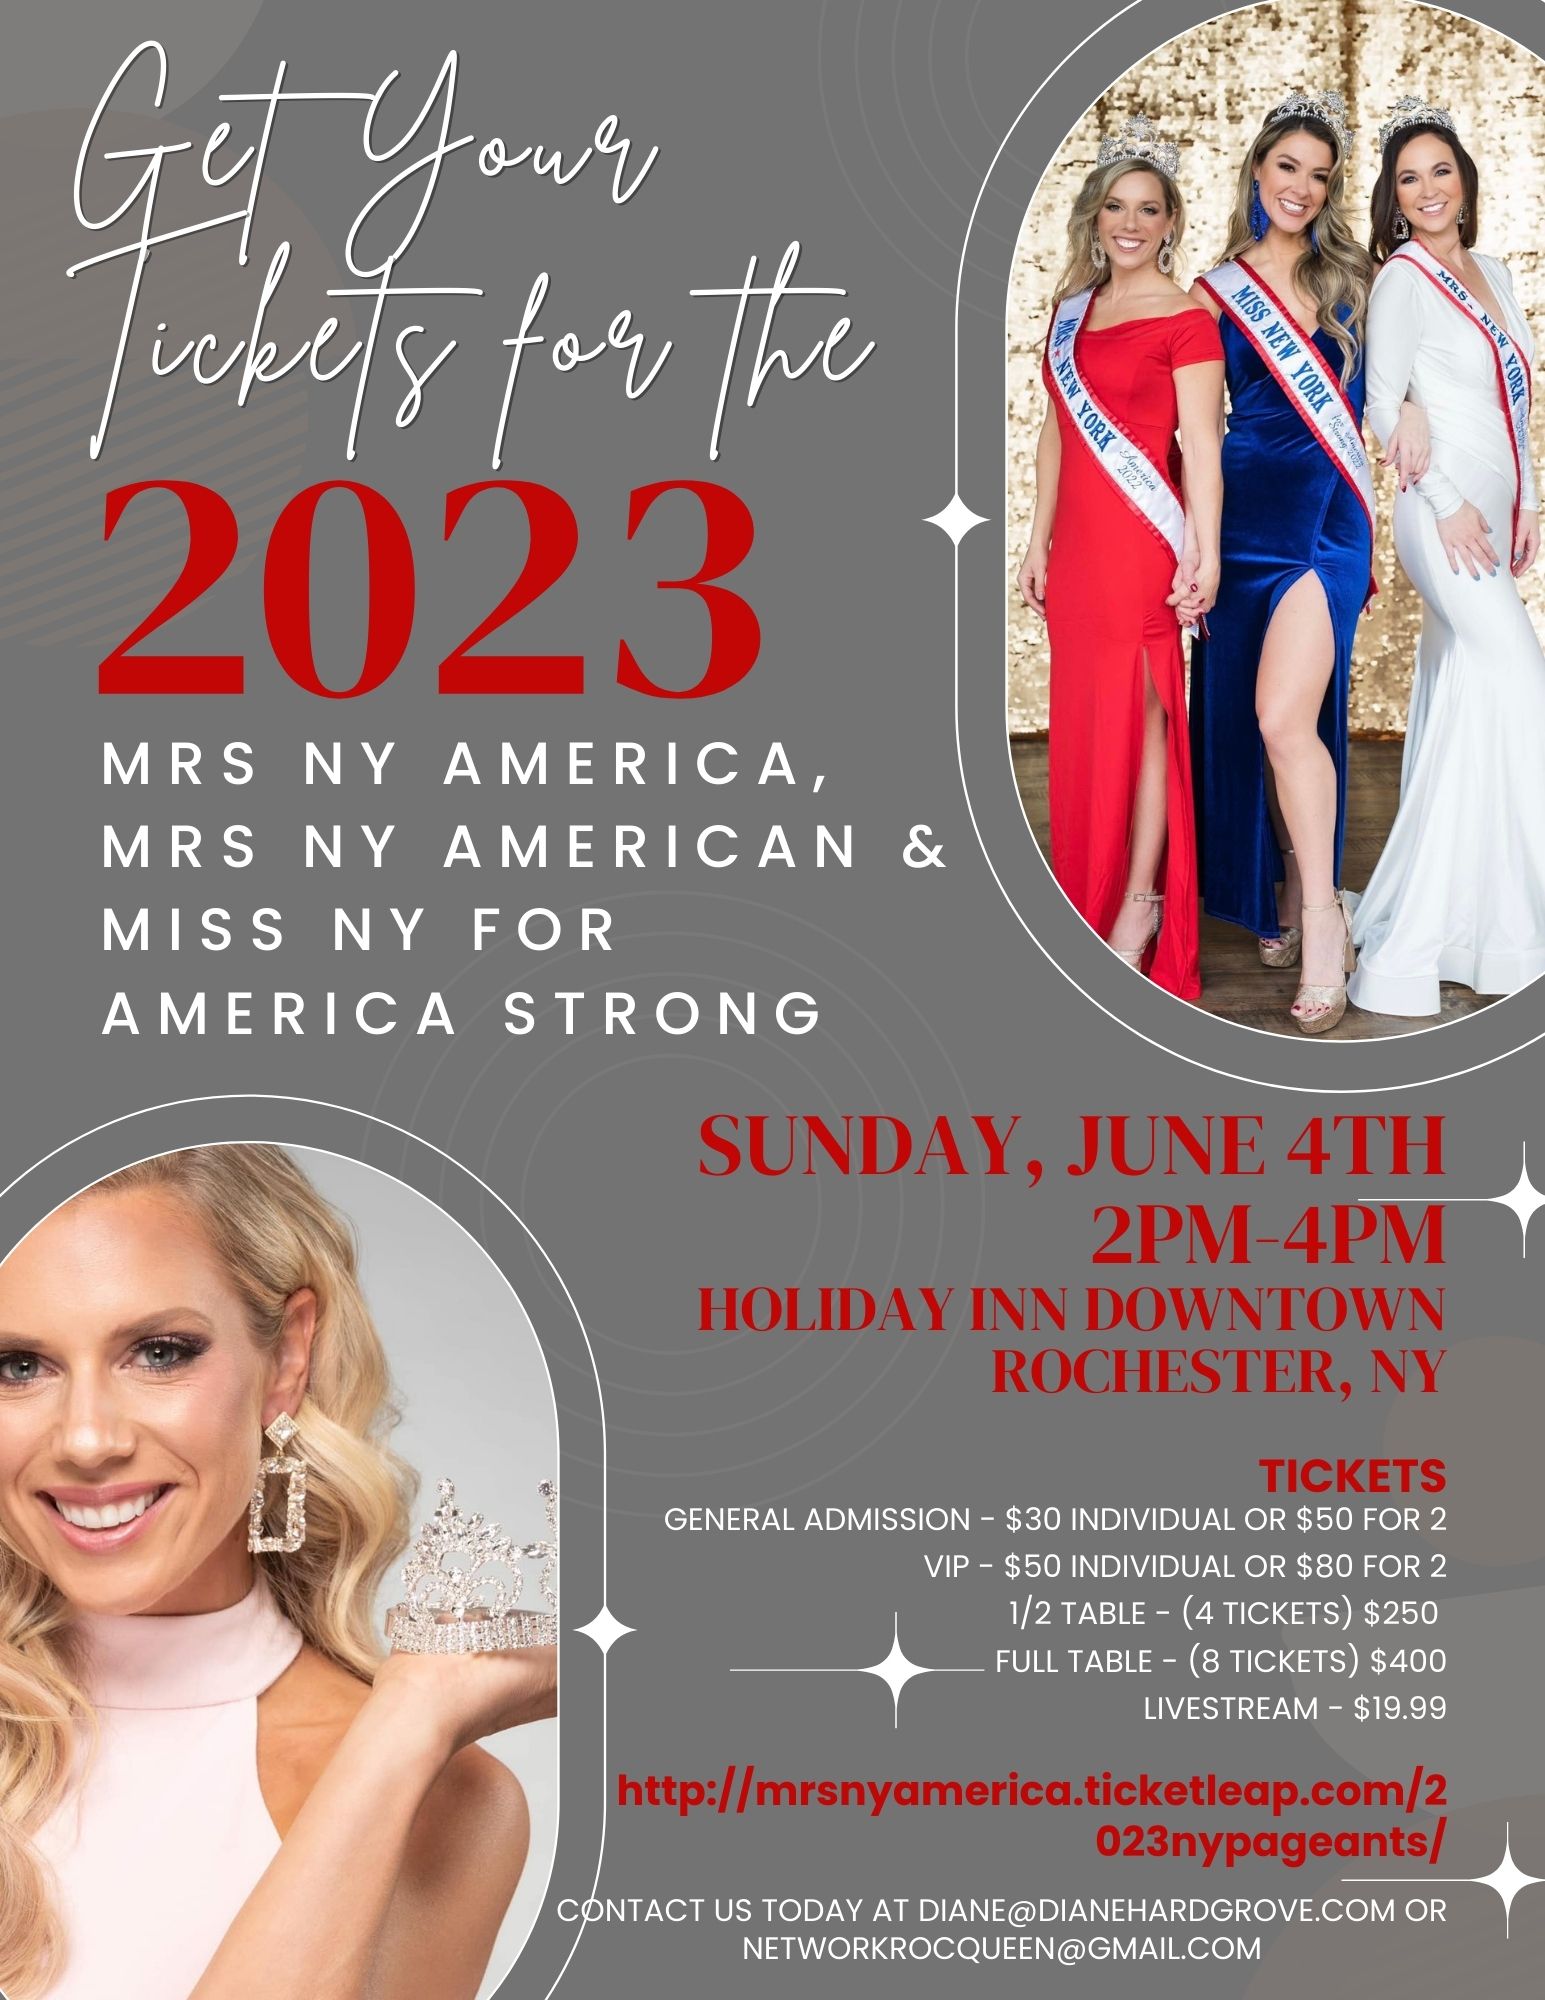 2023 Mrs NY America, American & Miss NY For America Strong Pageants